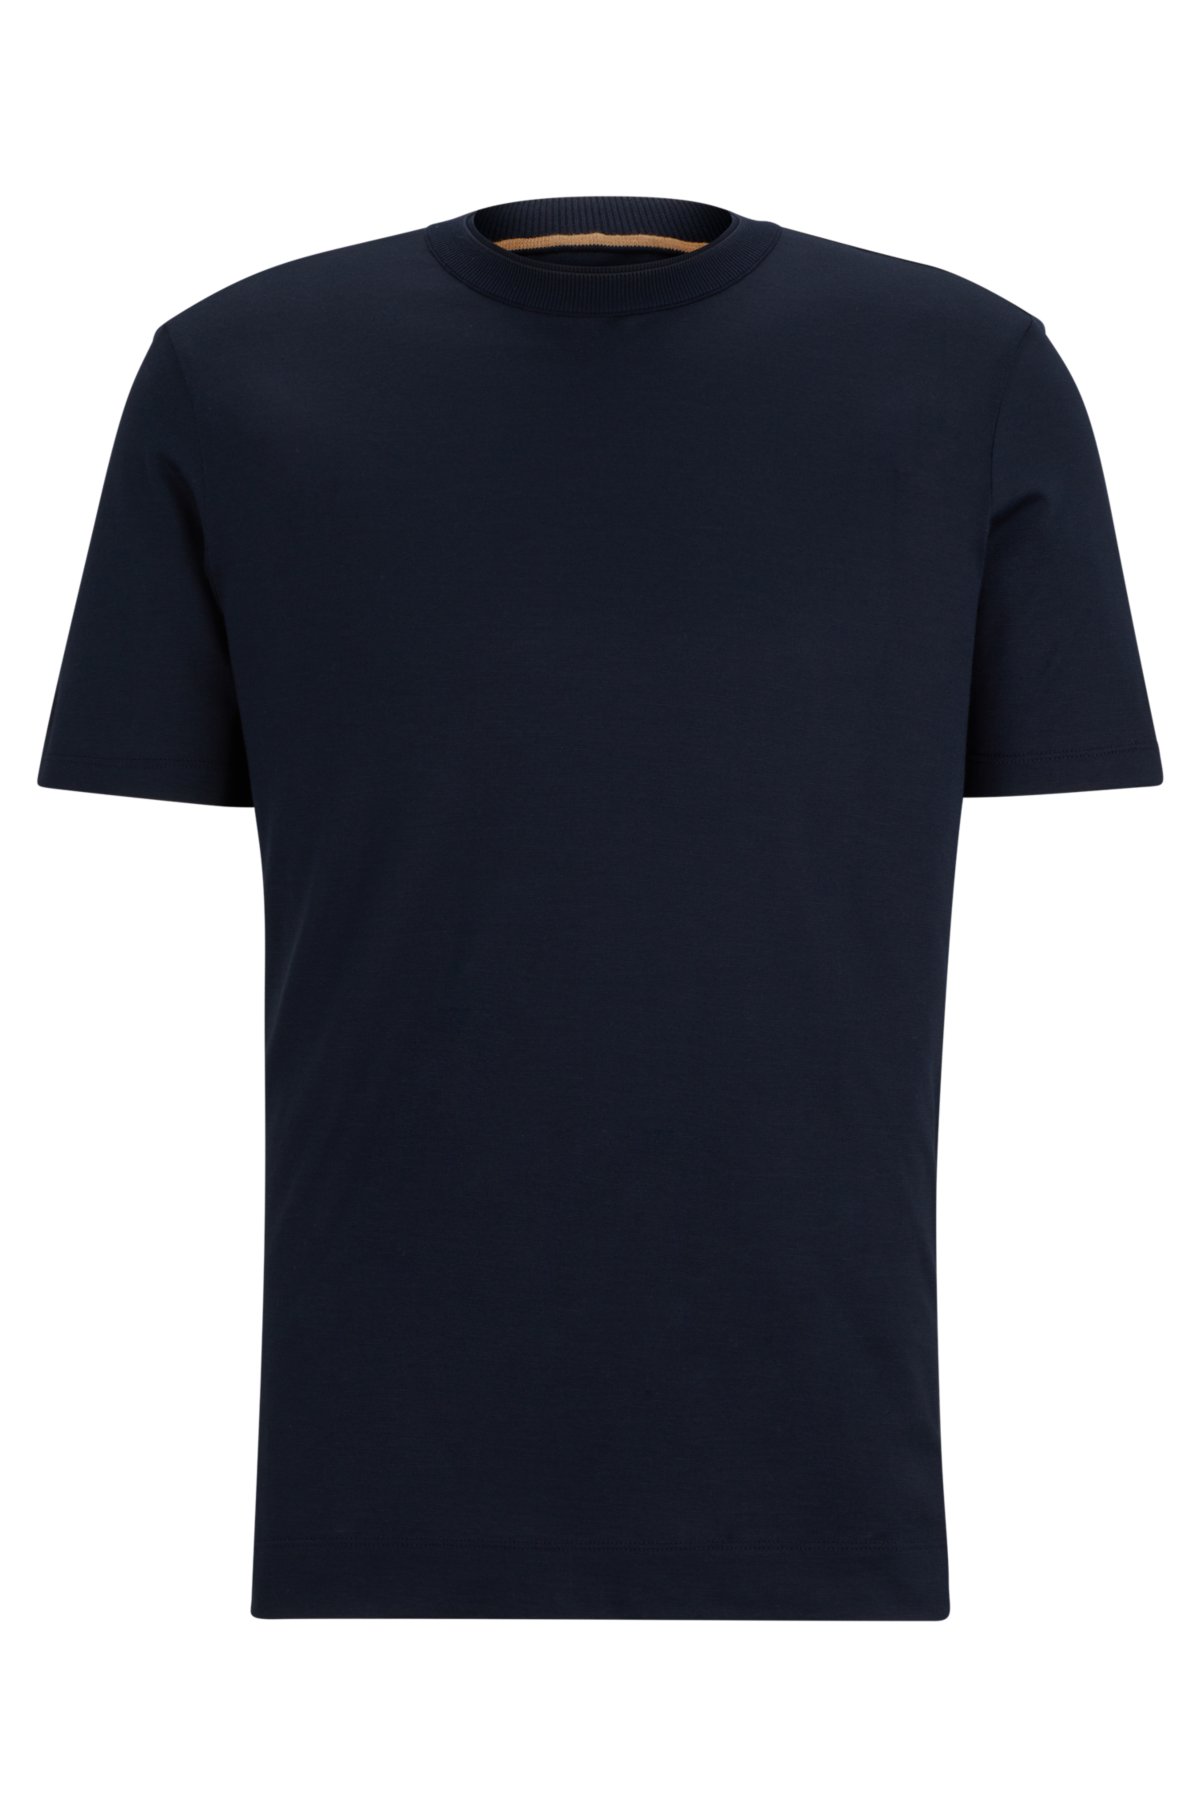 Cotton-silk T-shirt with fineline stripes and double collar, Dark Blue